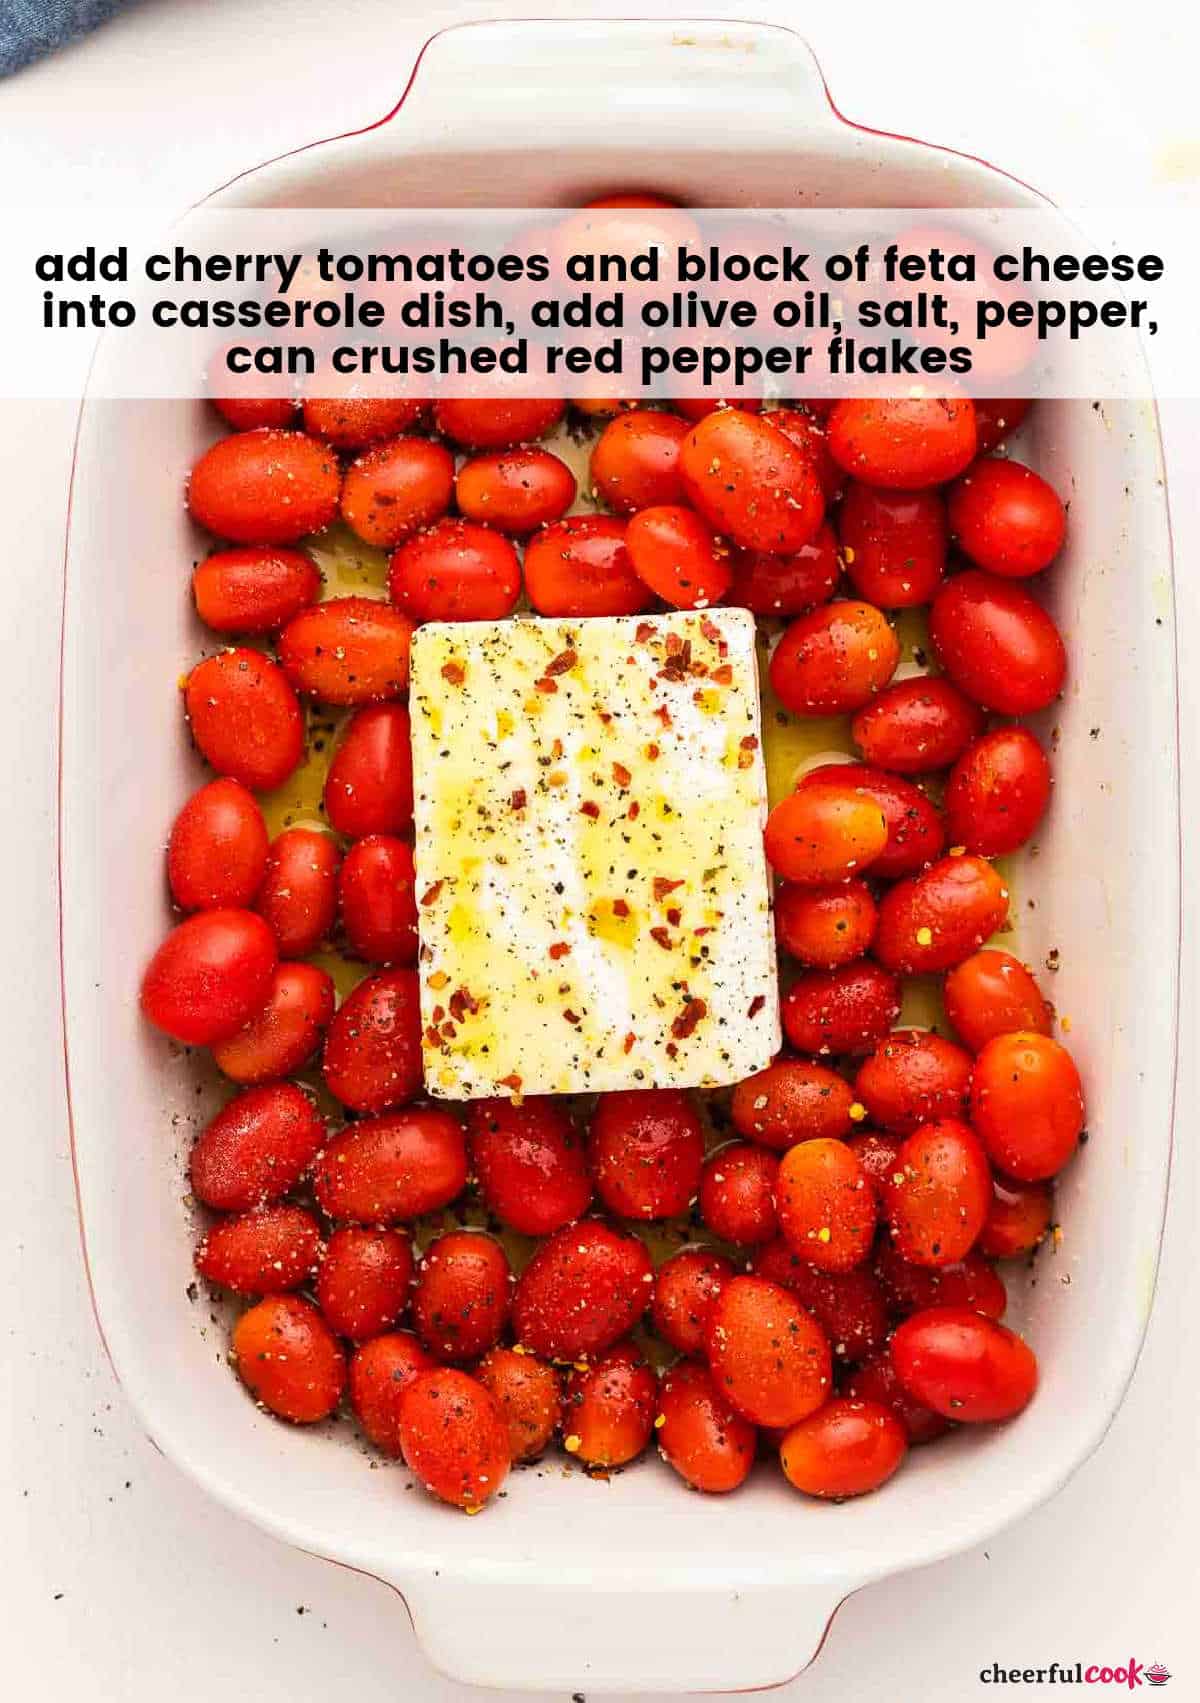 Process Step: tomatoes, feta cheese, olive oil and spices in a casserole dish.